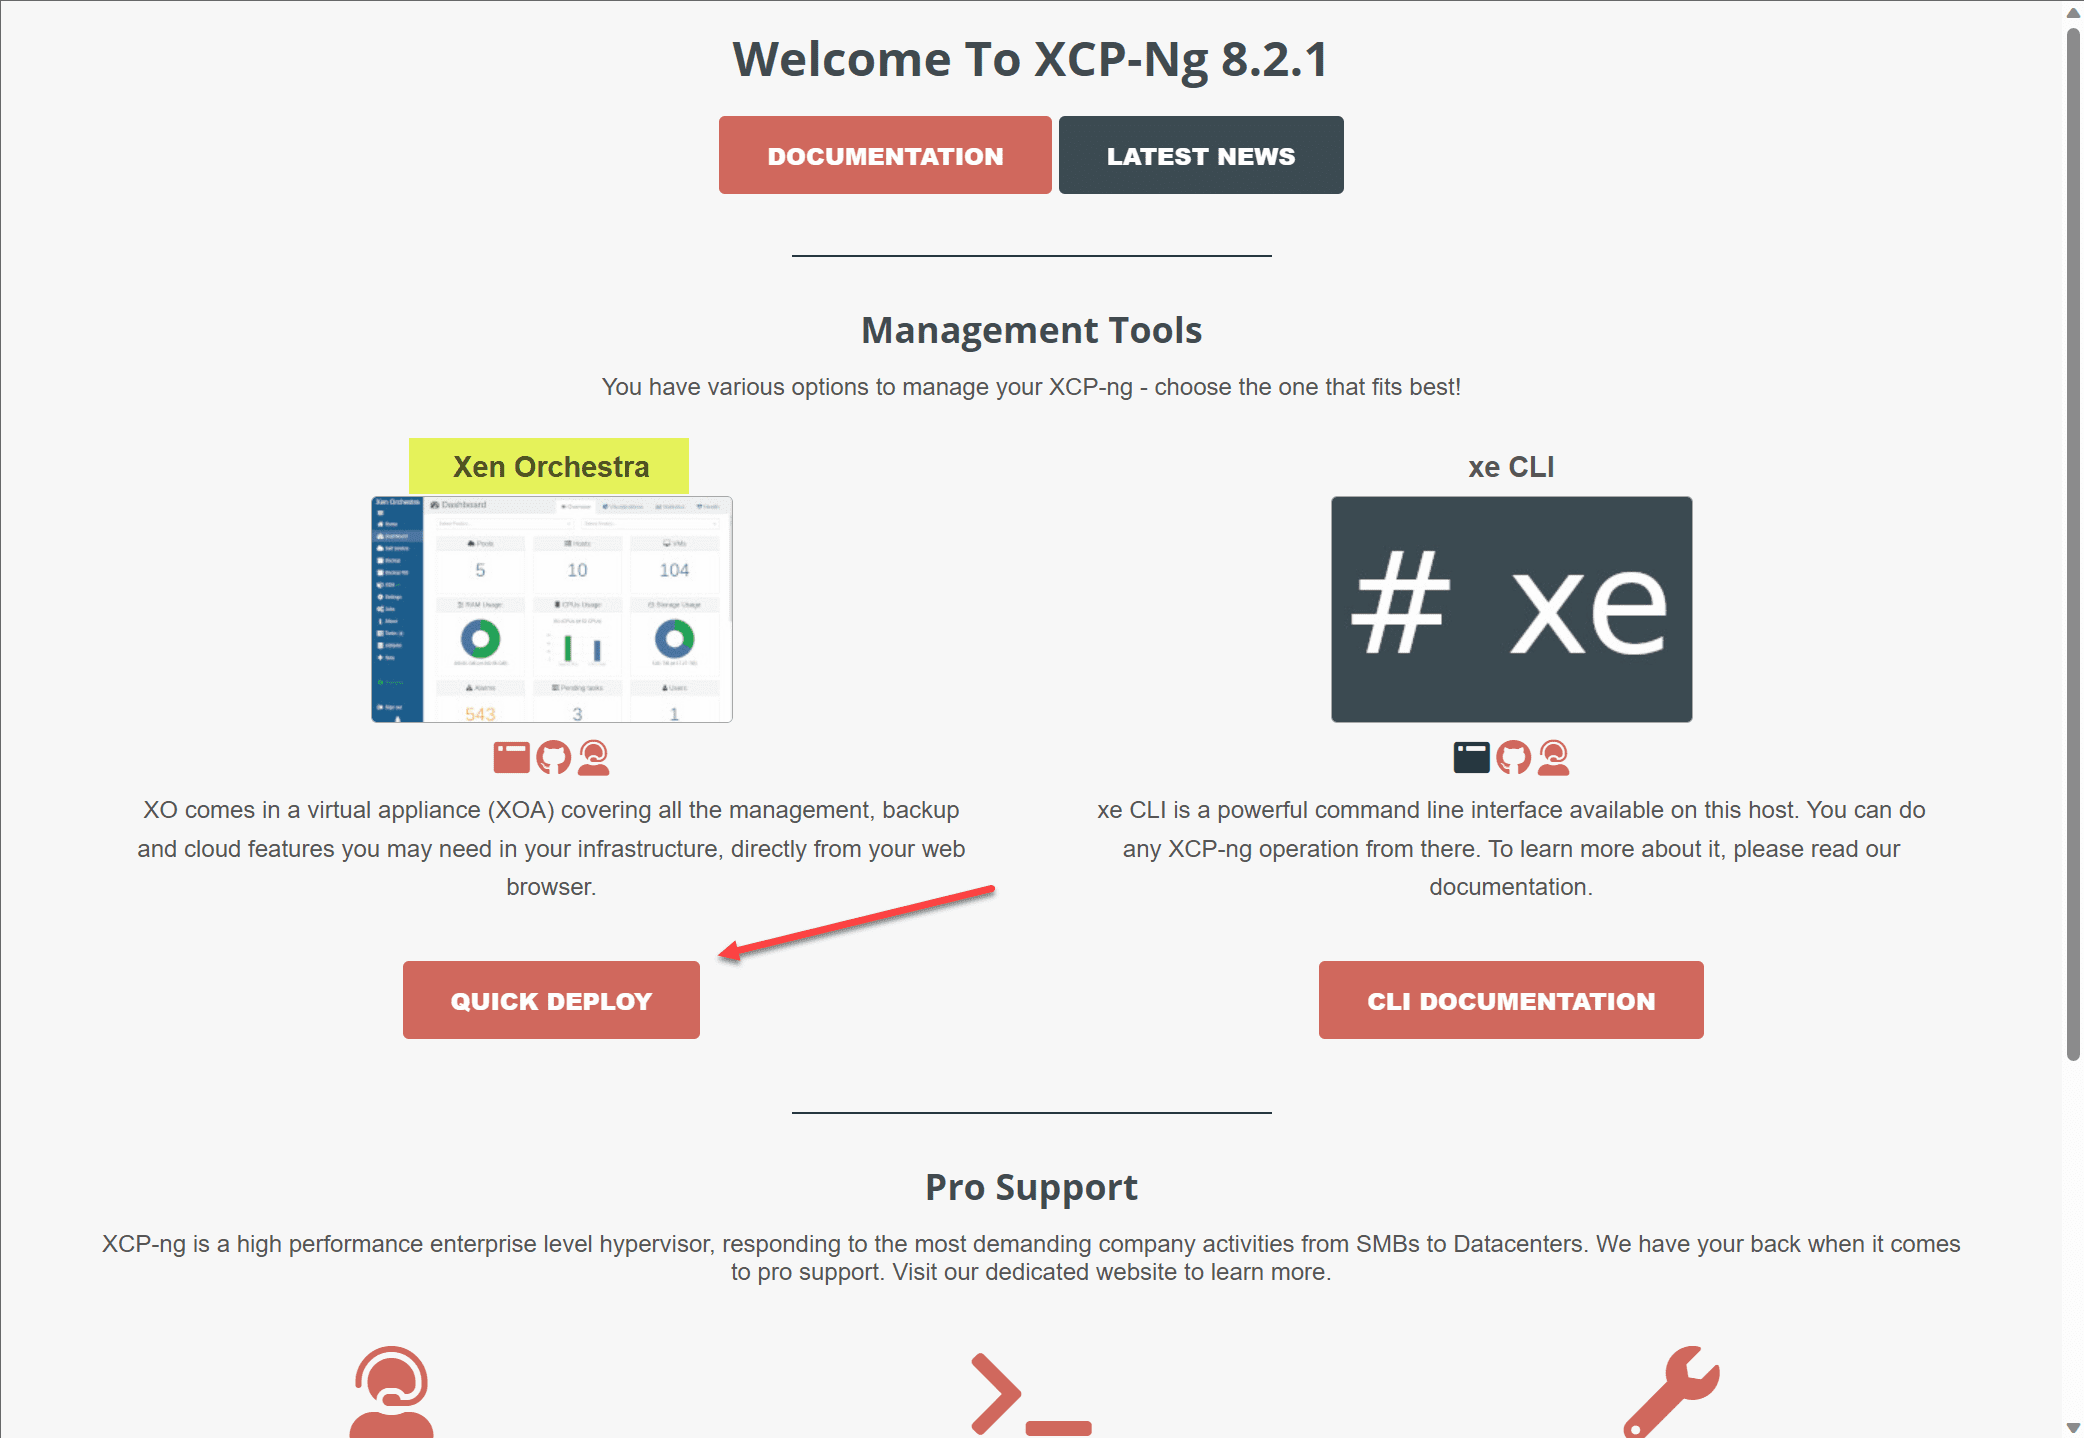 Quick deploy the Xen Orchstra appliance in your XCP ng environment